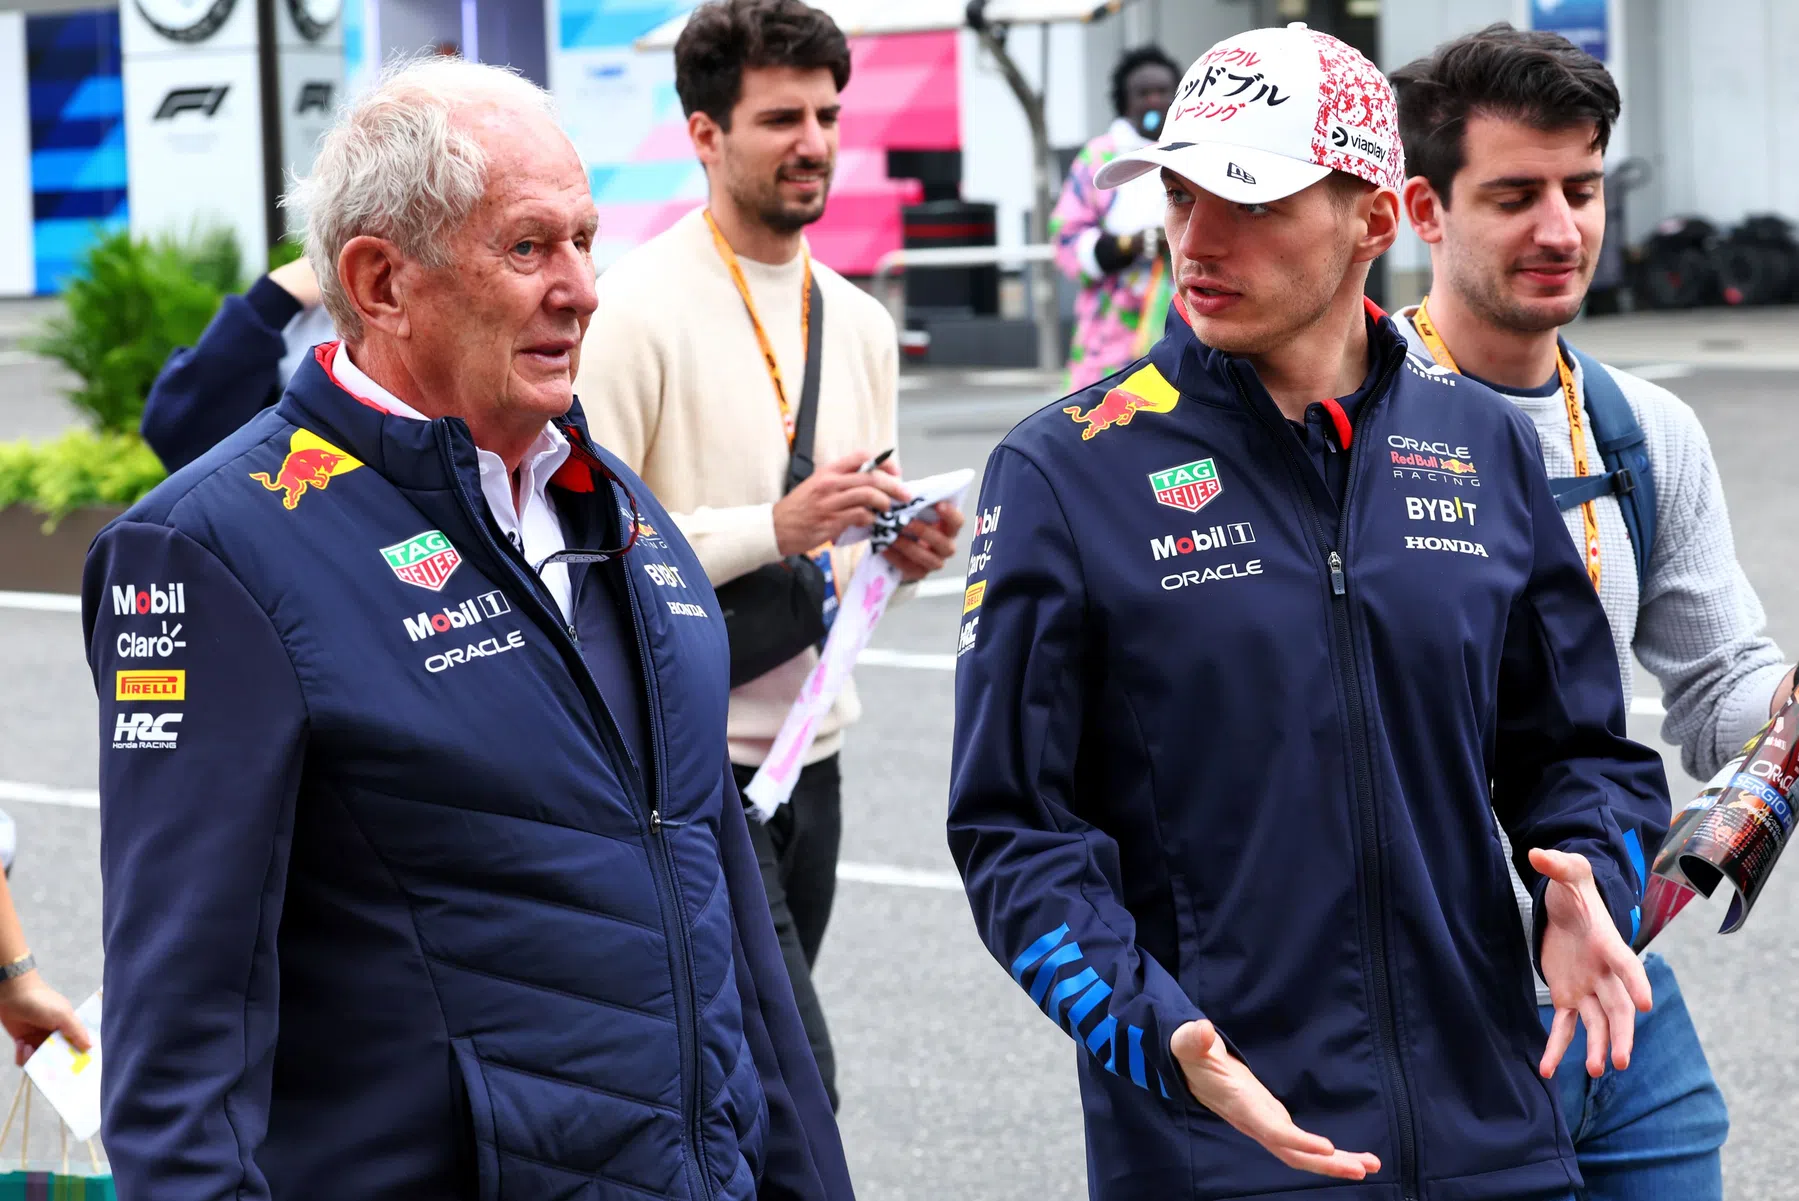 Marko is sure Verstappen would have beaten Norris without damage